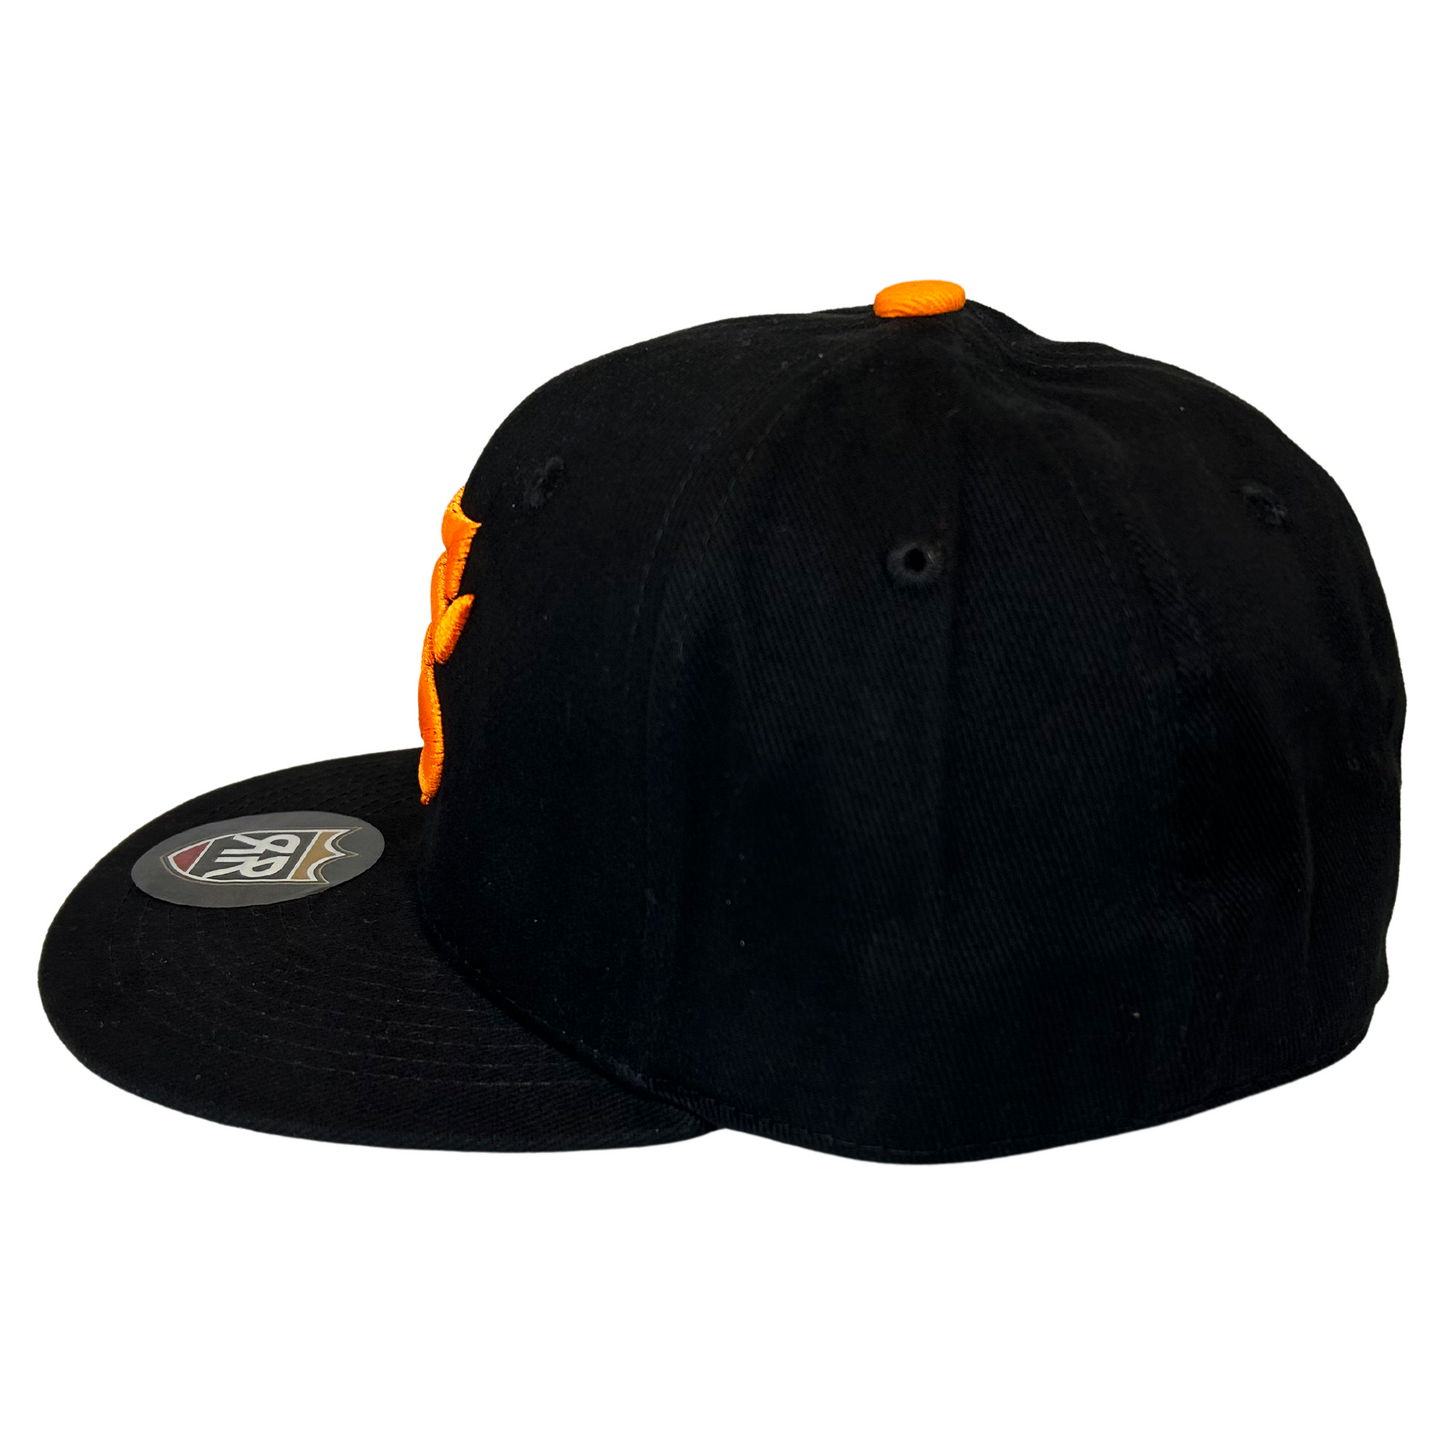 San Francisco Seals Fitted Hat